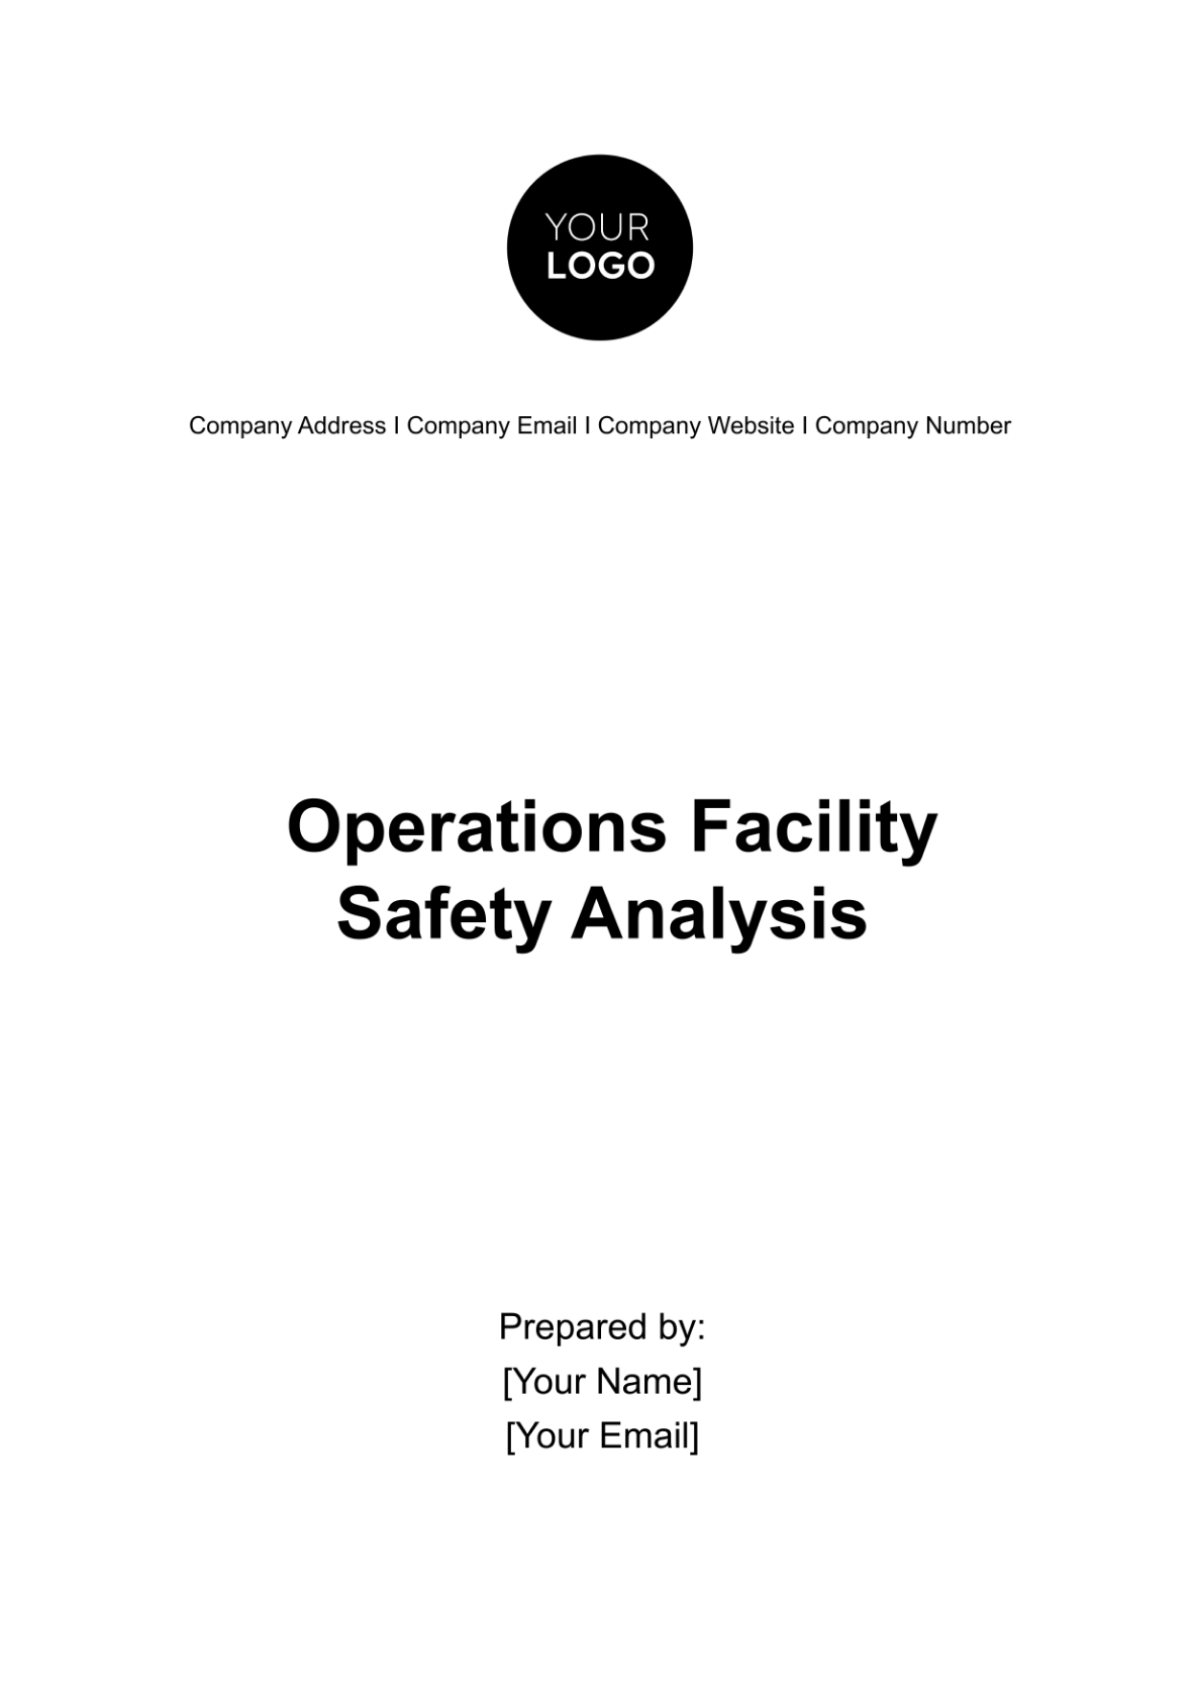 Operations Facility Safety Analysis Template